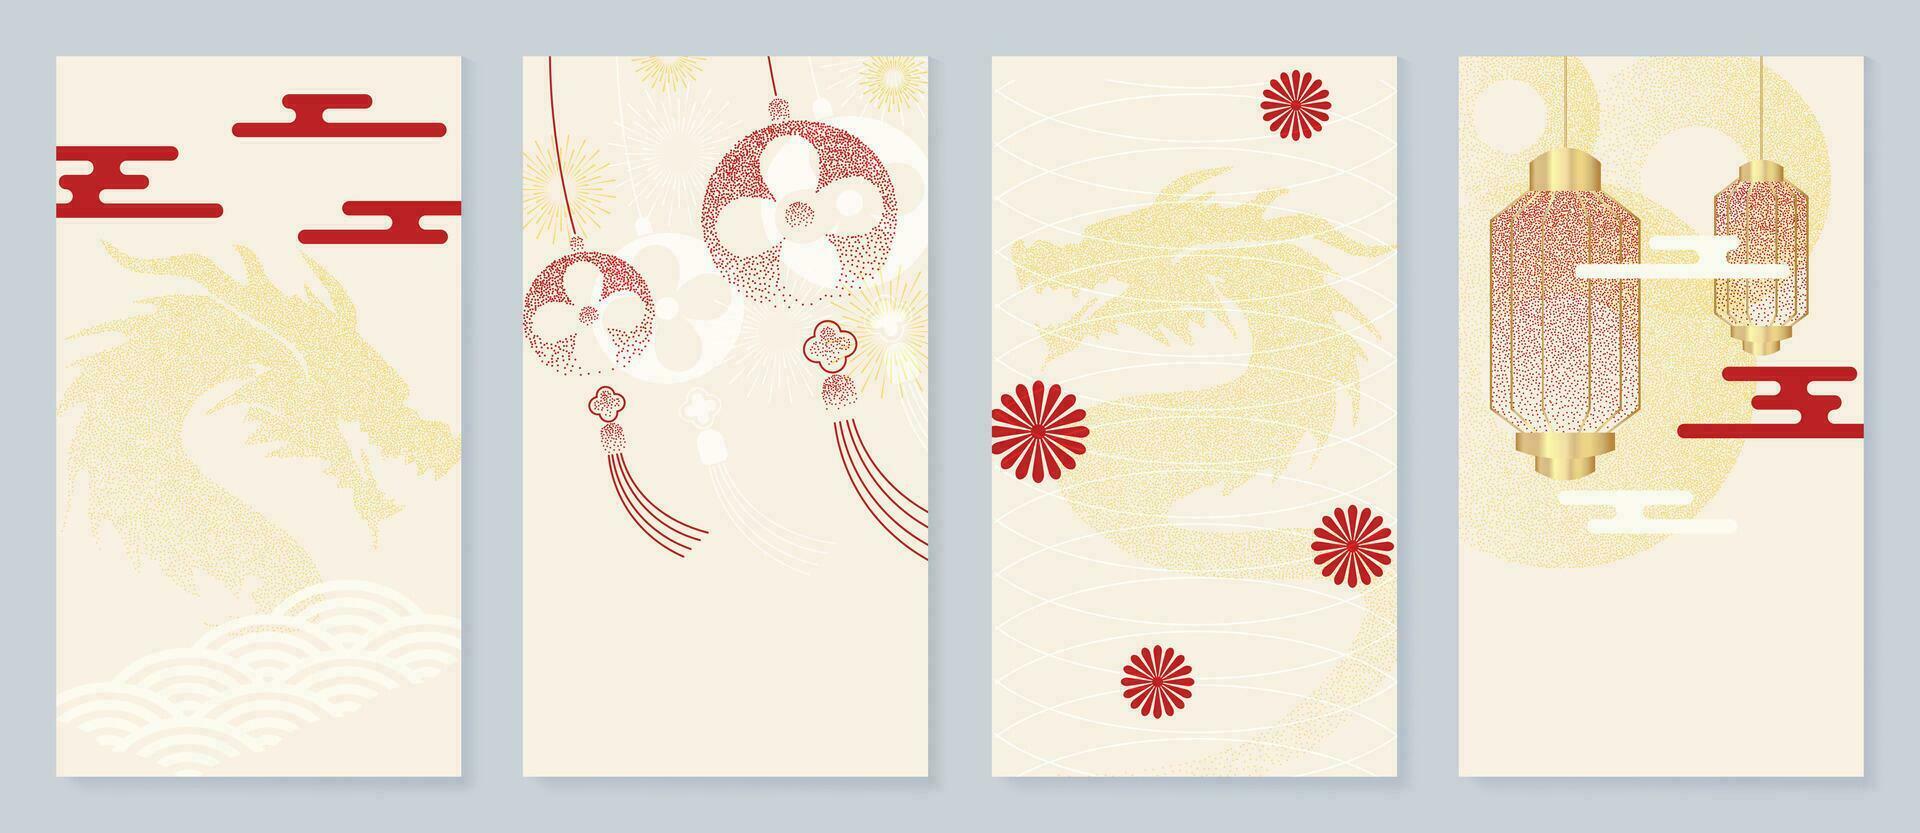 Chinese New Year cover background vector. Year of the dragon design with lanterns, sea wave, dragon, coin, flowers, firework, gold texture. Elegant oriental illustration for cover, banner, website. vector